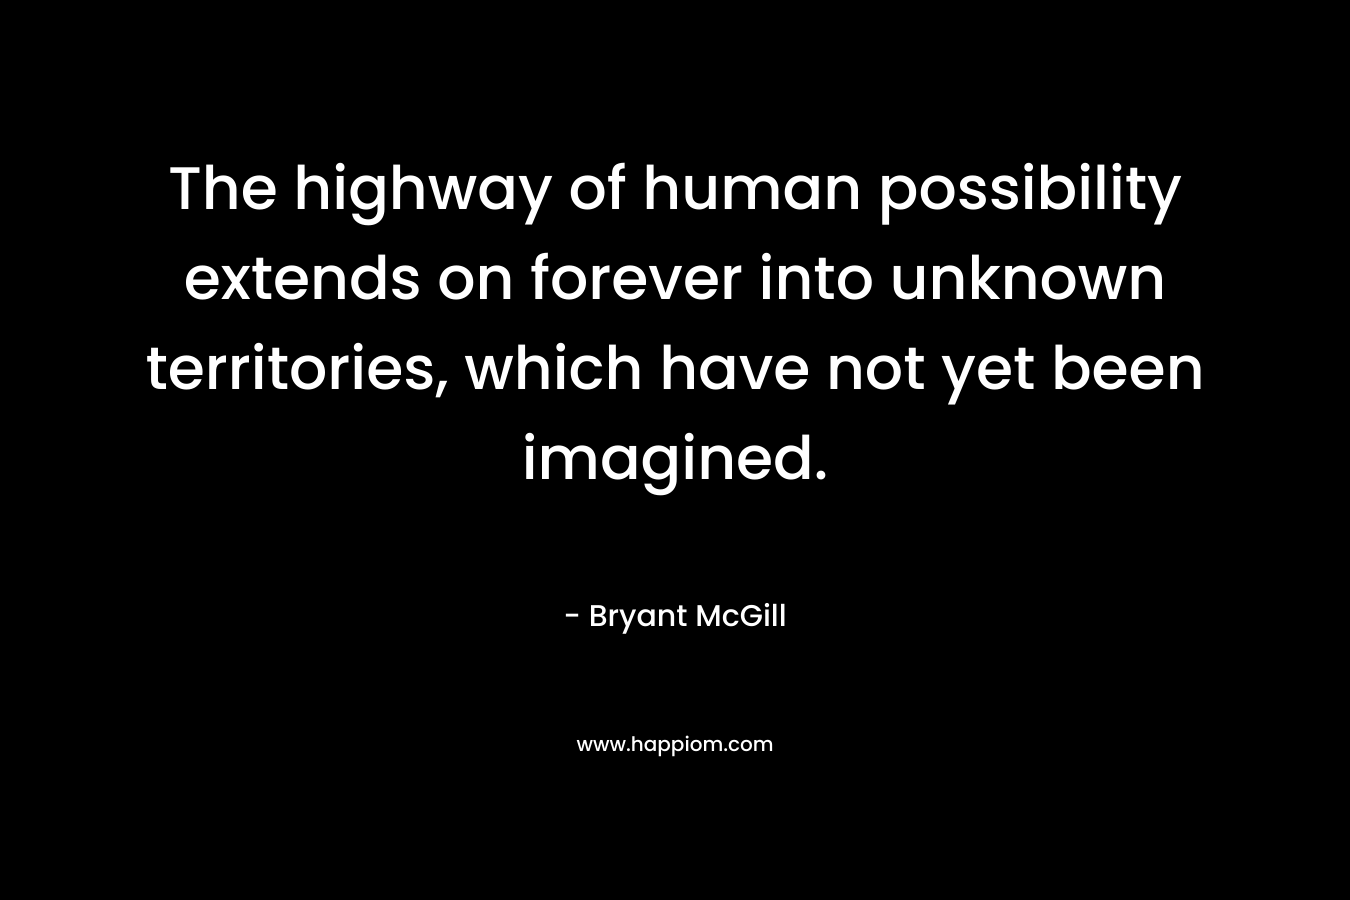 The highway of human possibility extends on forever into unknown territories, which have not yet been imagined. – Bryant McGill